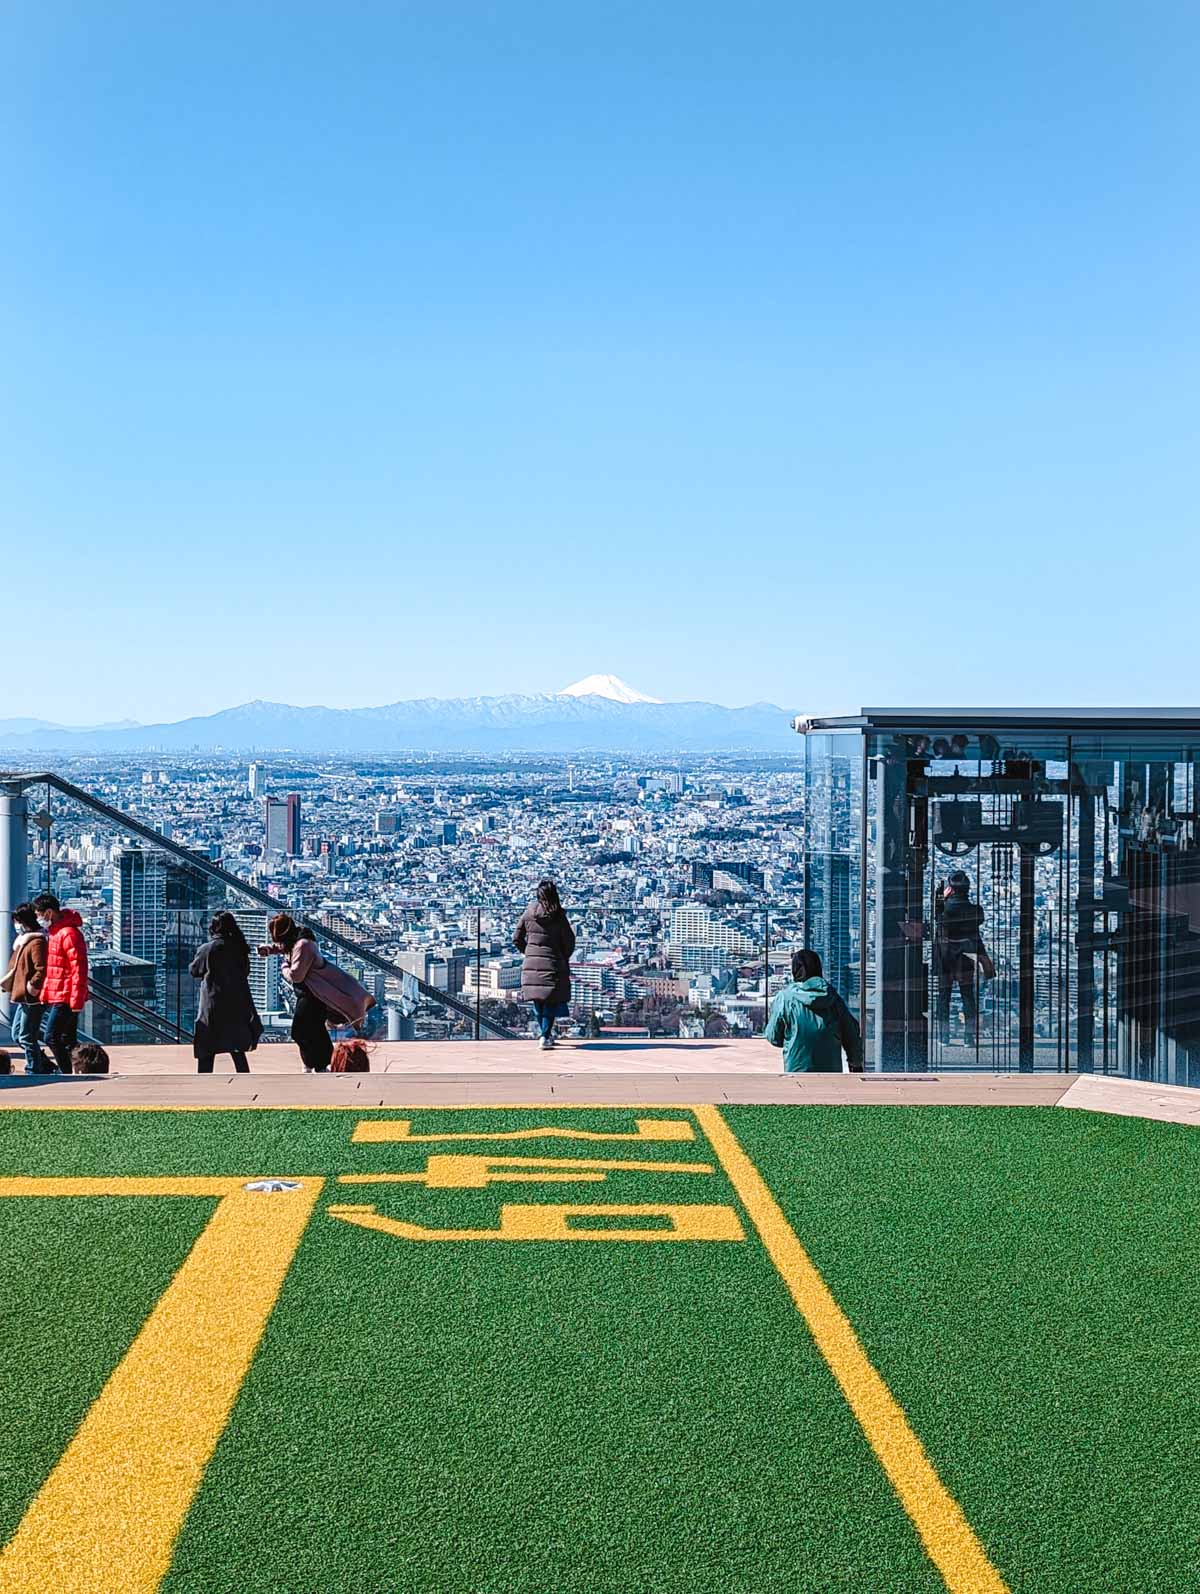 View of Mt Fuji and Tokyo city from rooftop deck of Shibuya Sky.